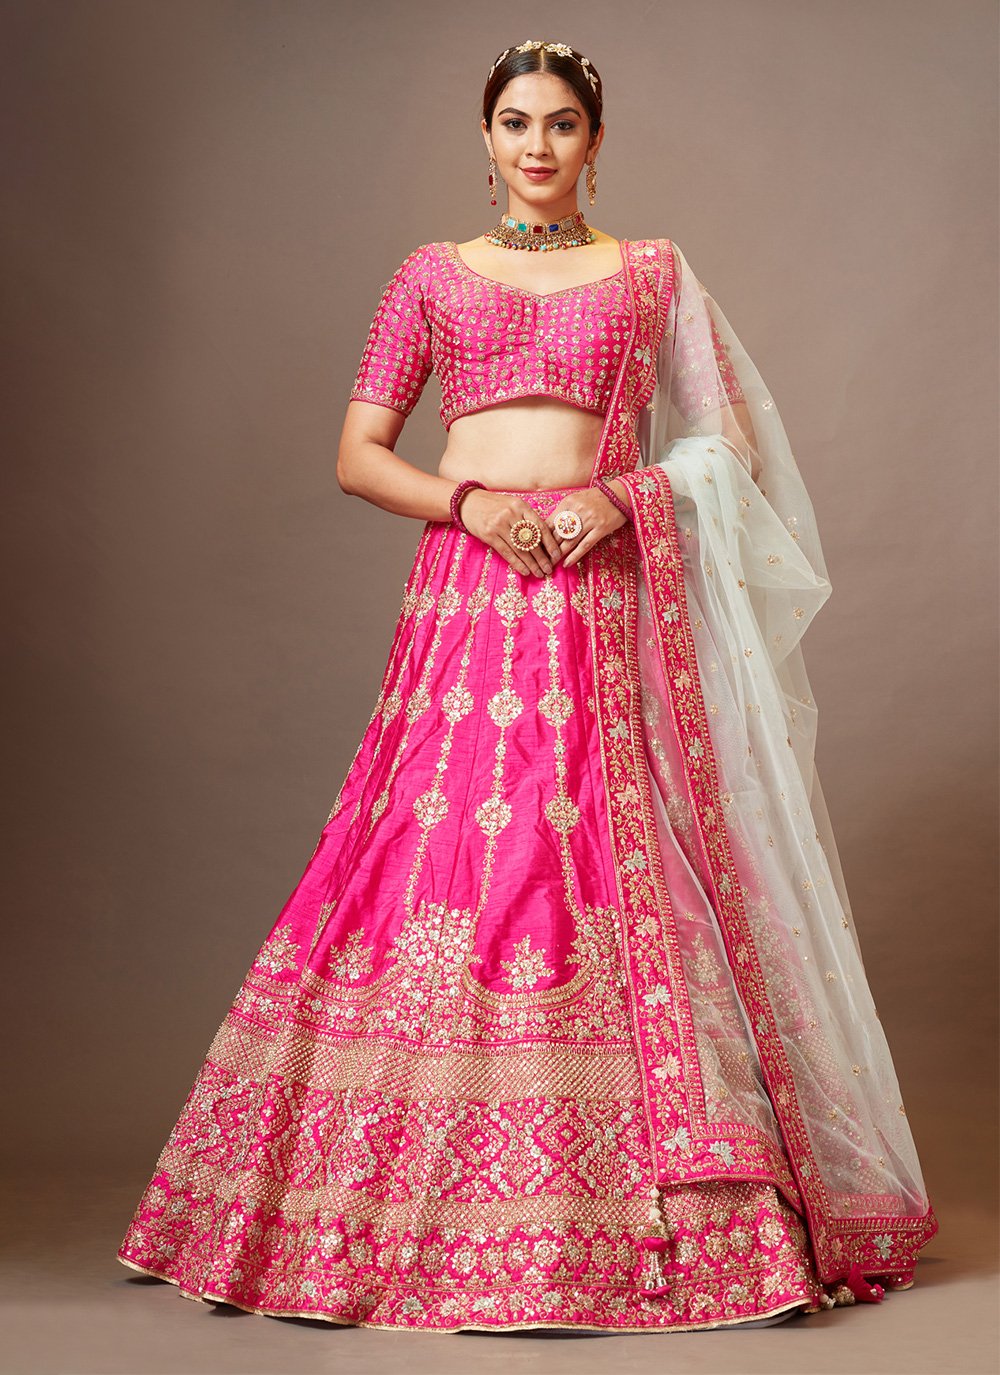 9 Engagement Lehenga Inspirations Every Bride Needs to See Before She  Begins Her Bridal Shopping